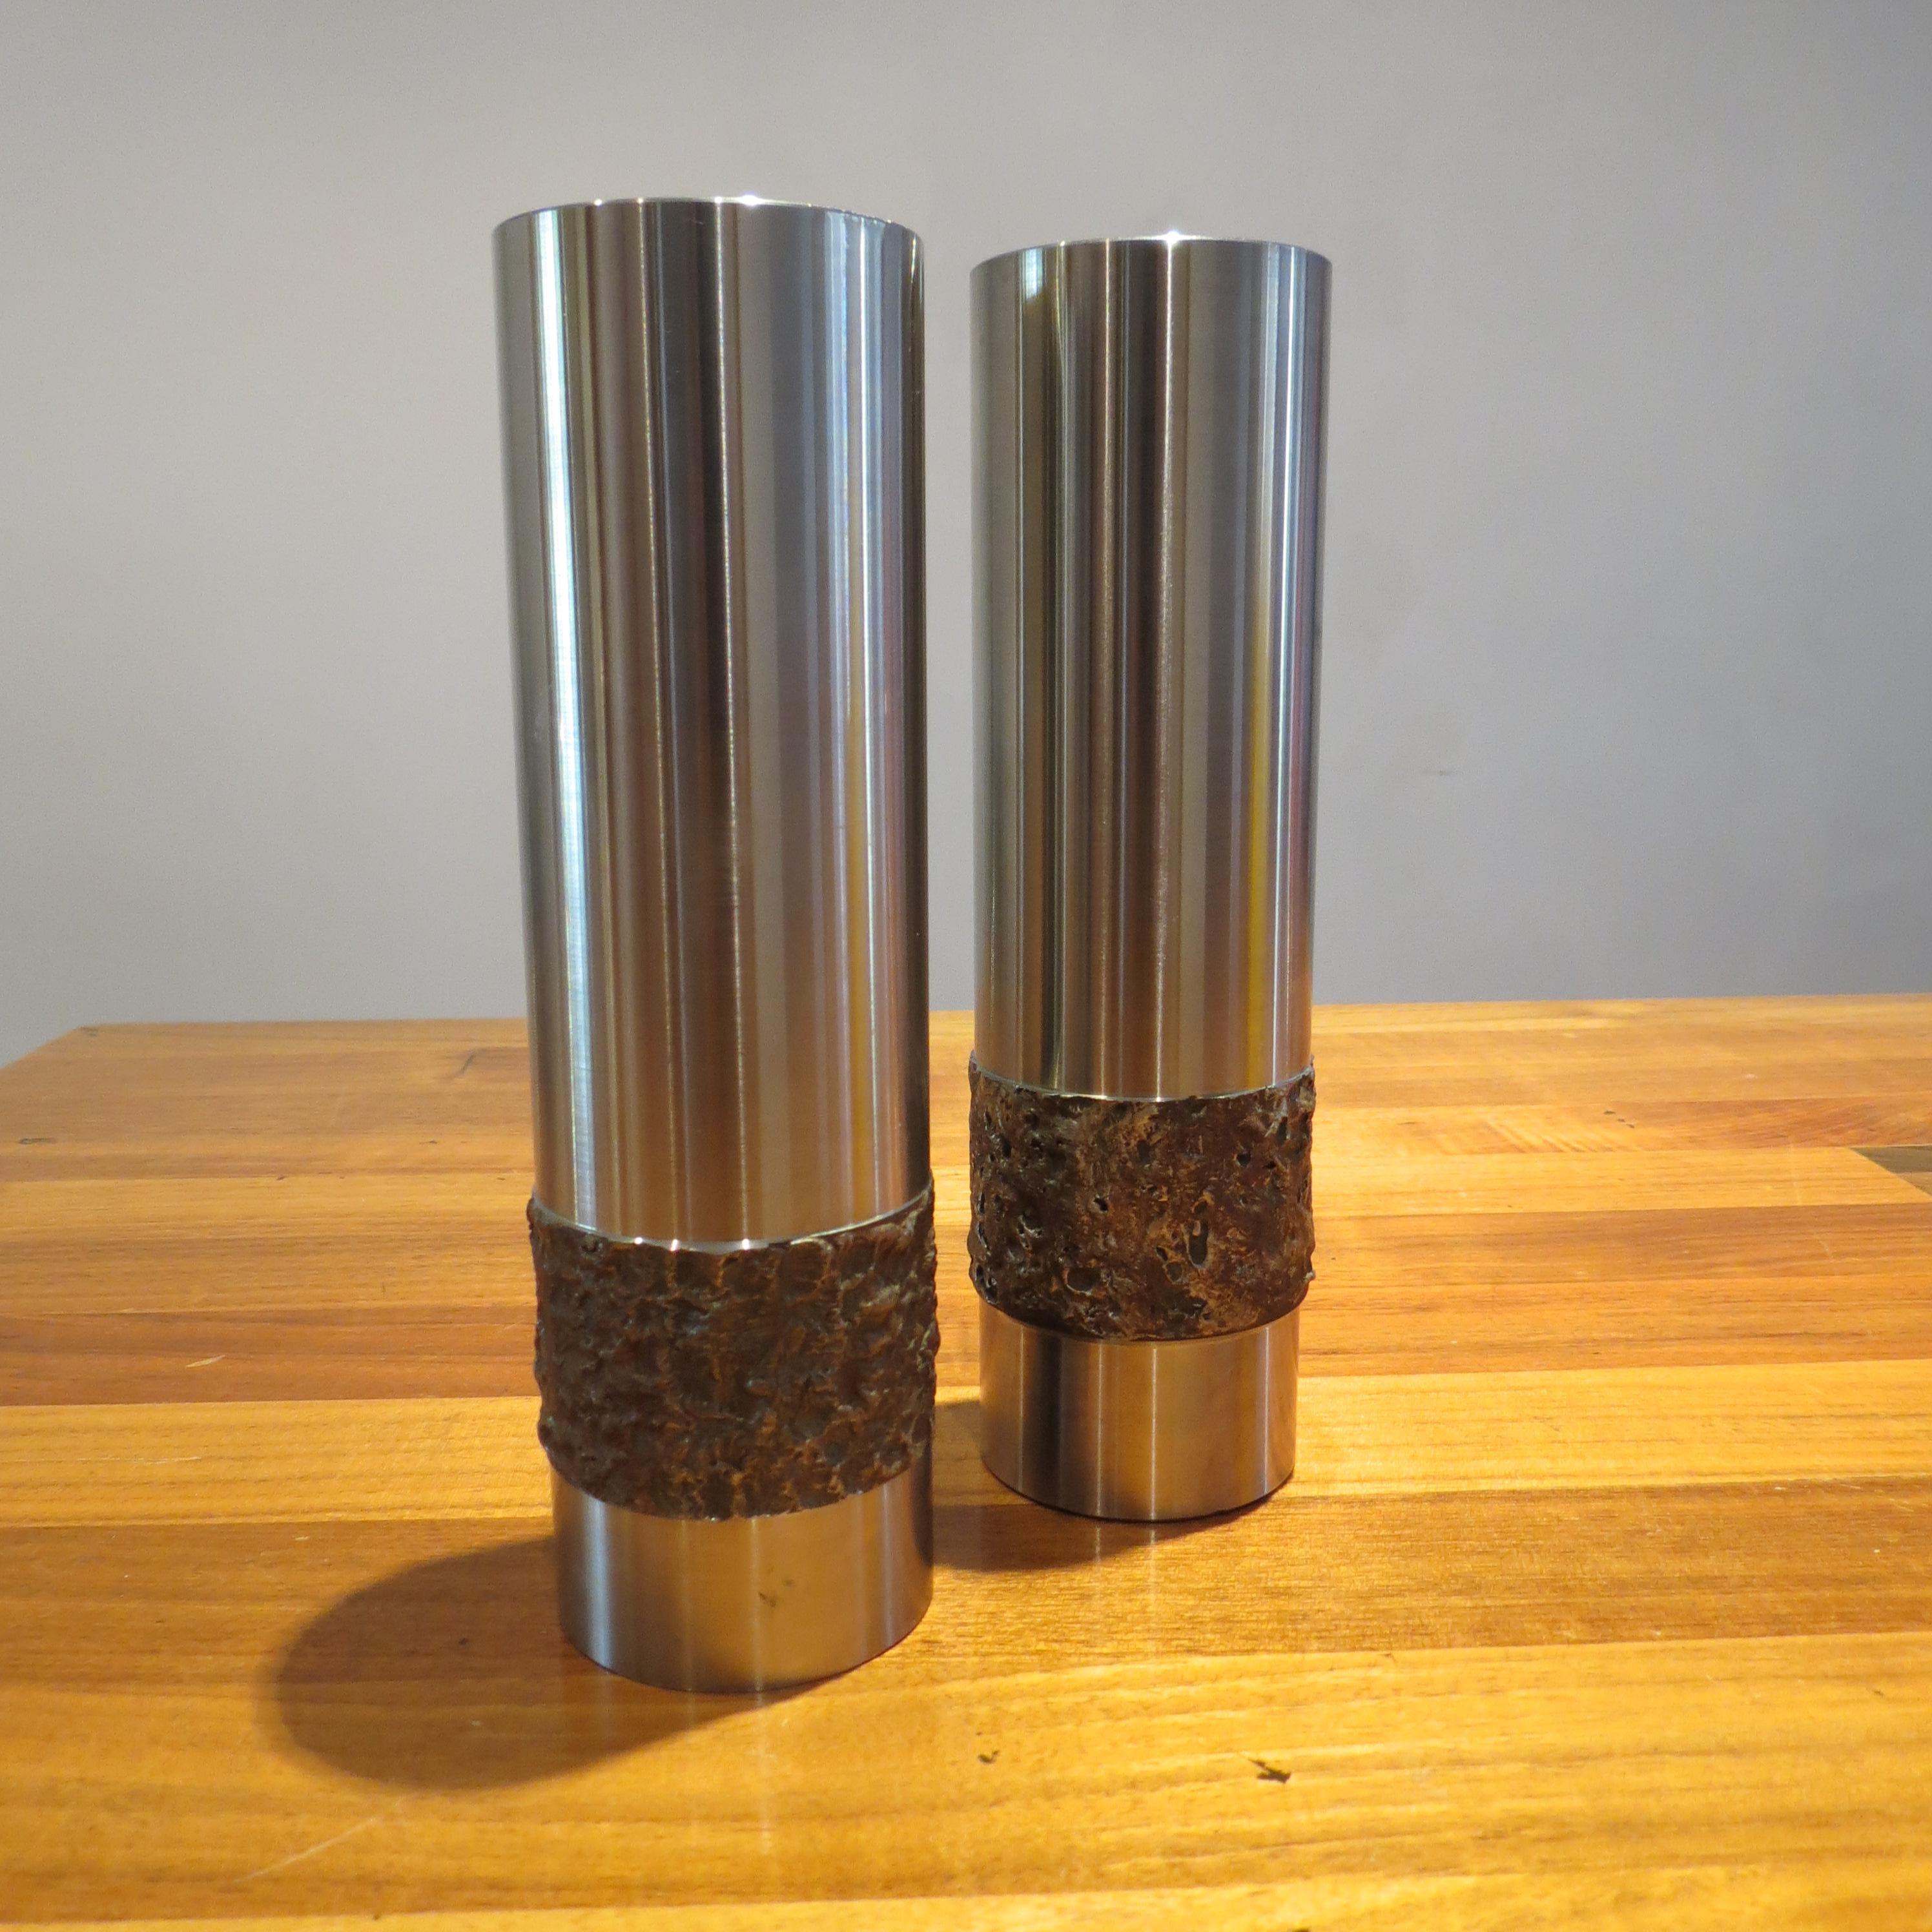 Pair of stainless steel vases in Brutalist form from the 1970s. 
Hand produced in Germany, turned stainless steel with decorative pattern. Very heavy good quality piece, could also be used as candleholders. 
 

The each measure 20.5 cm x 6 cm